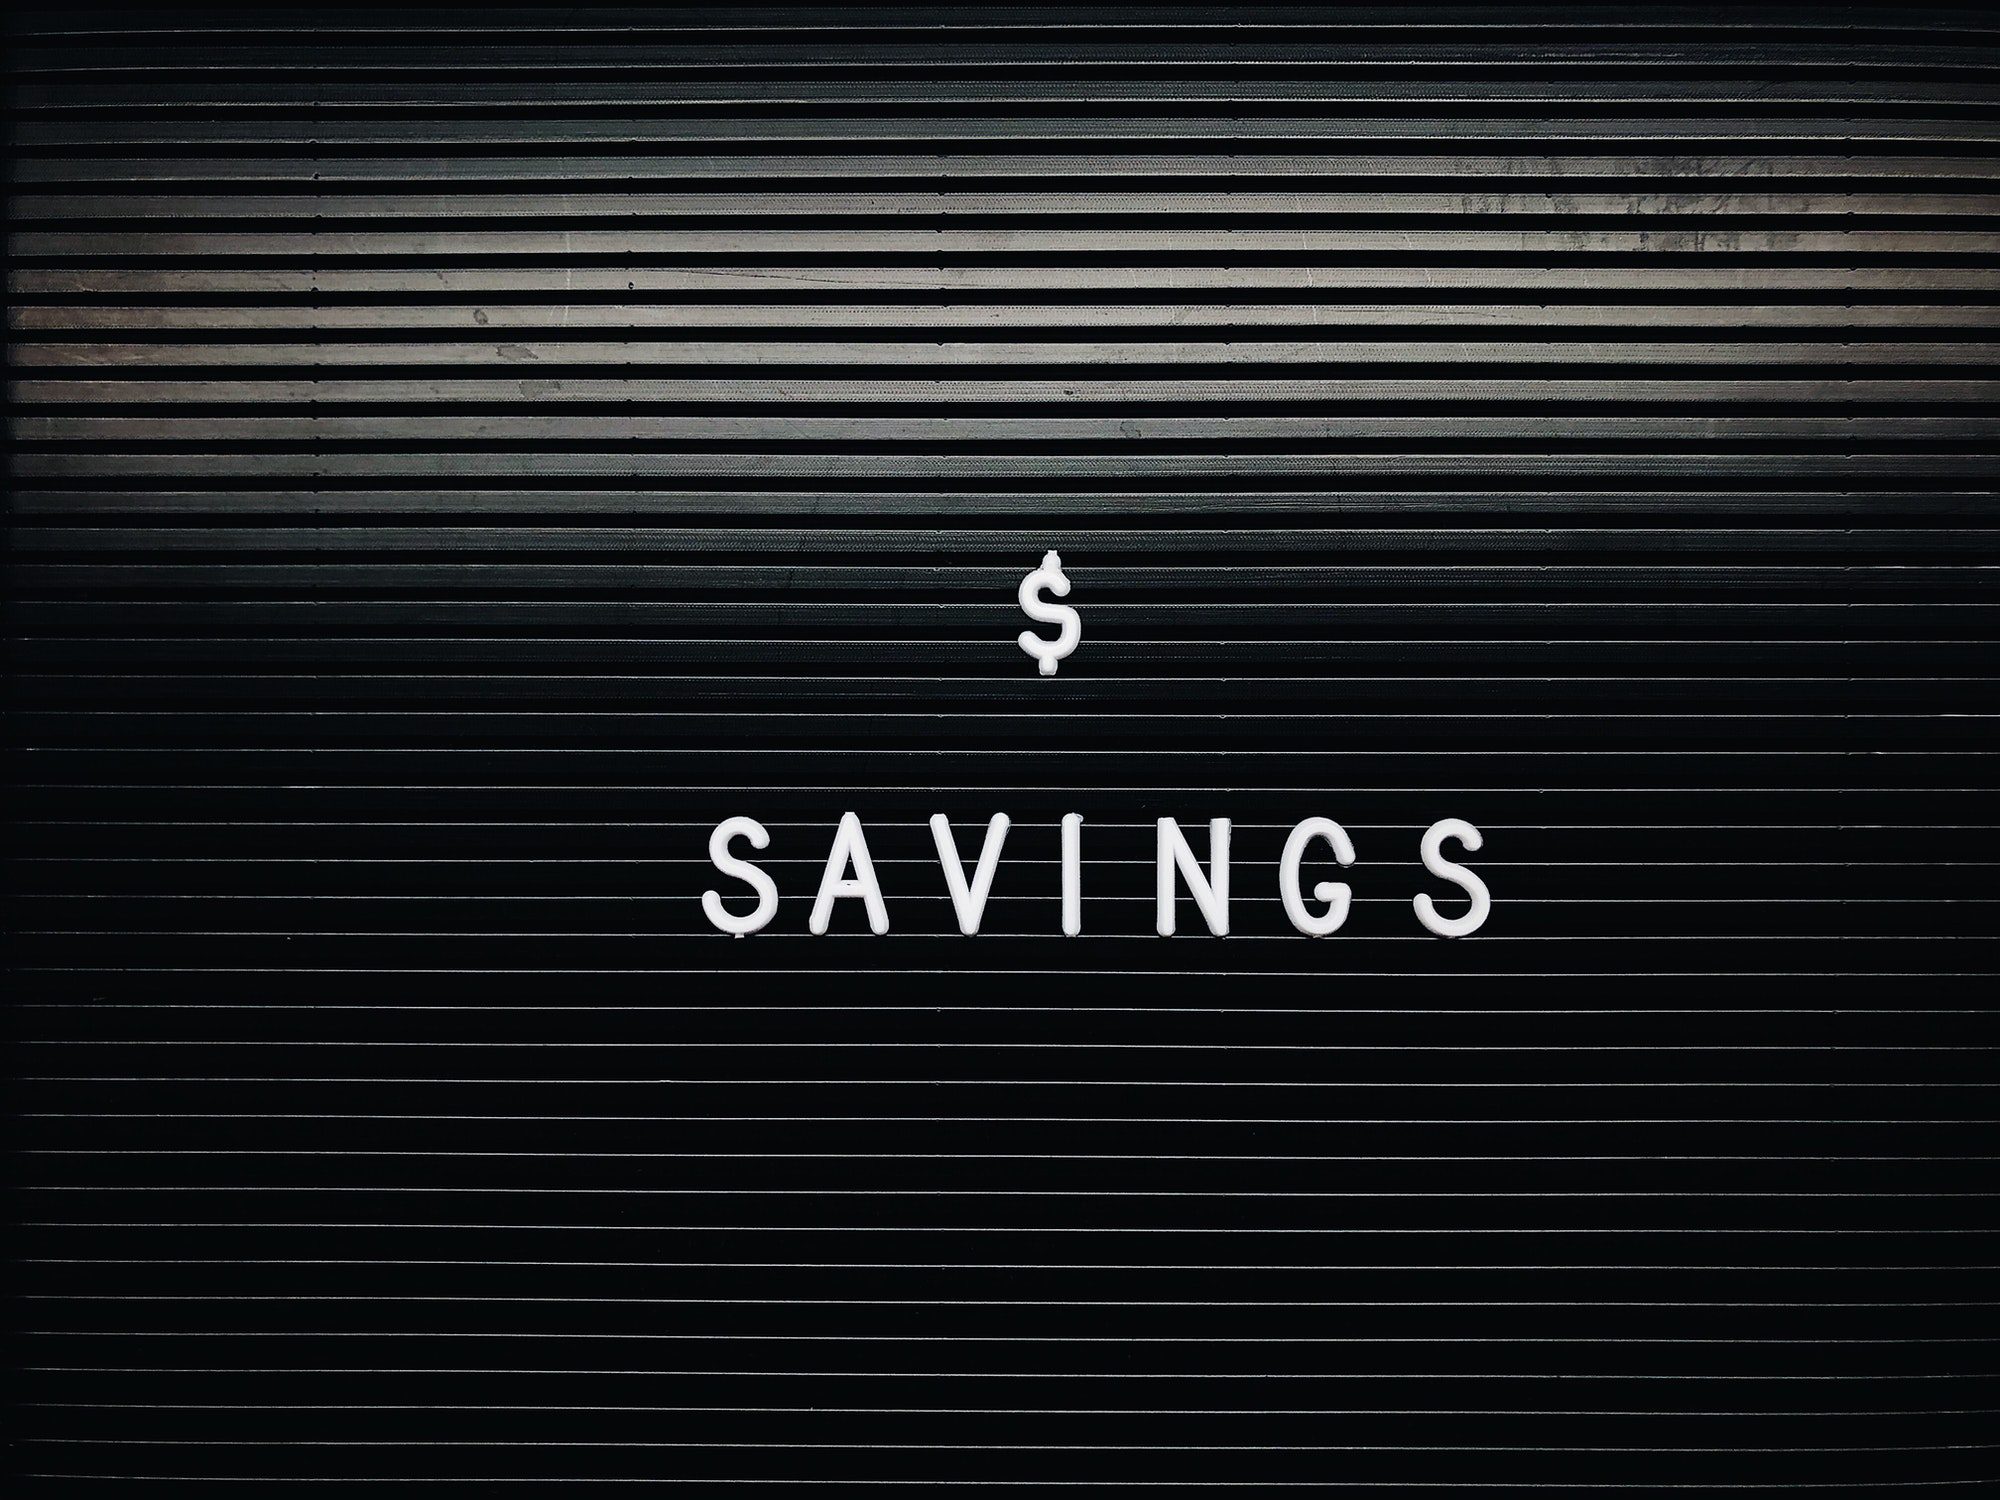 Savings spelled out on a board referring to a Medicare Medical Savings Account.